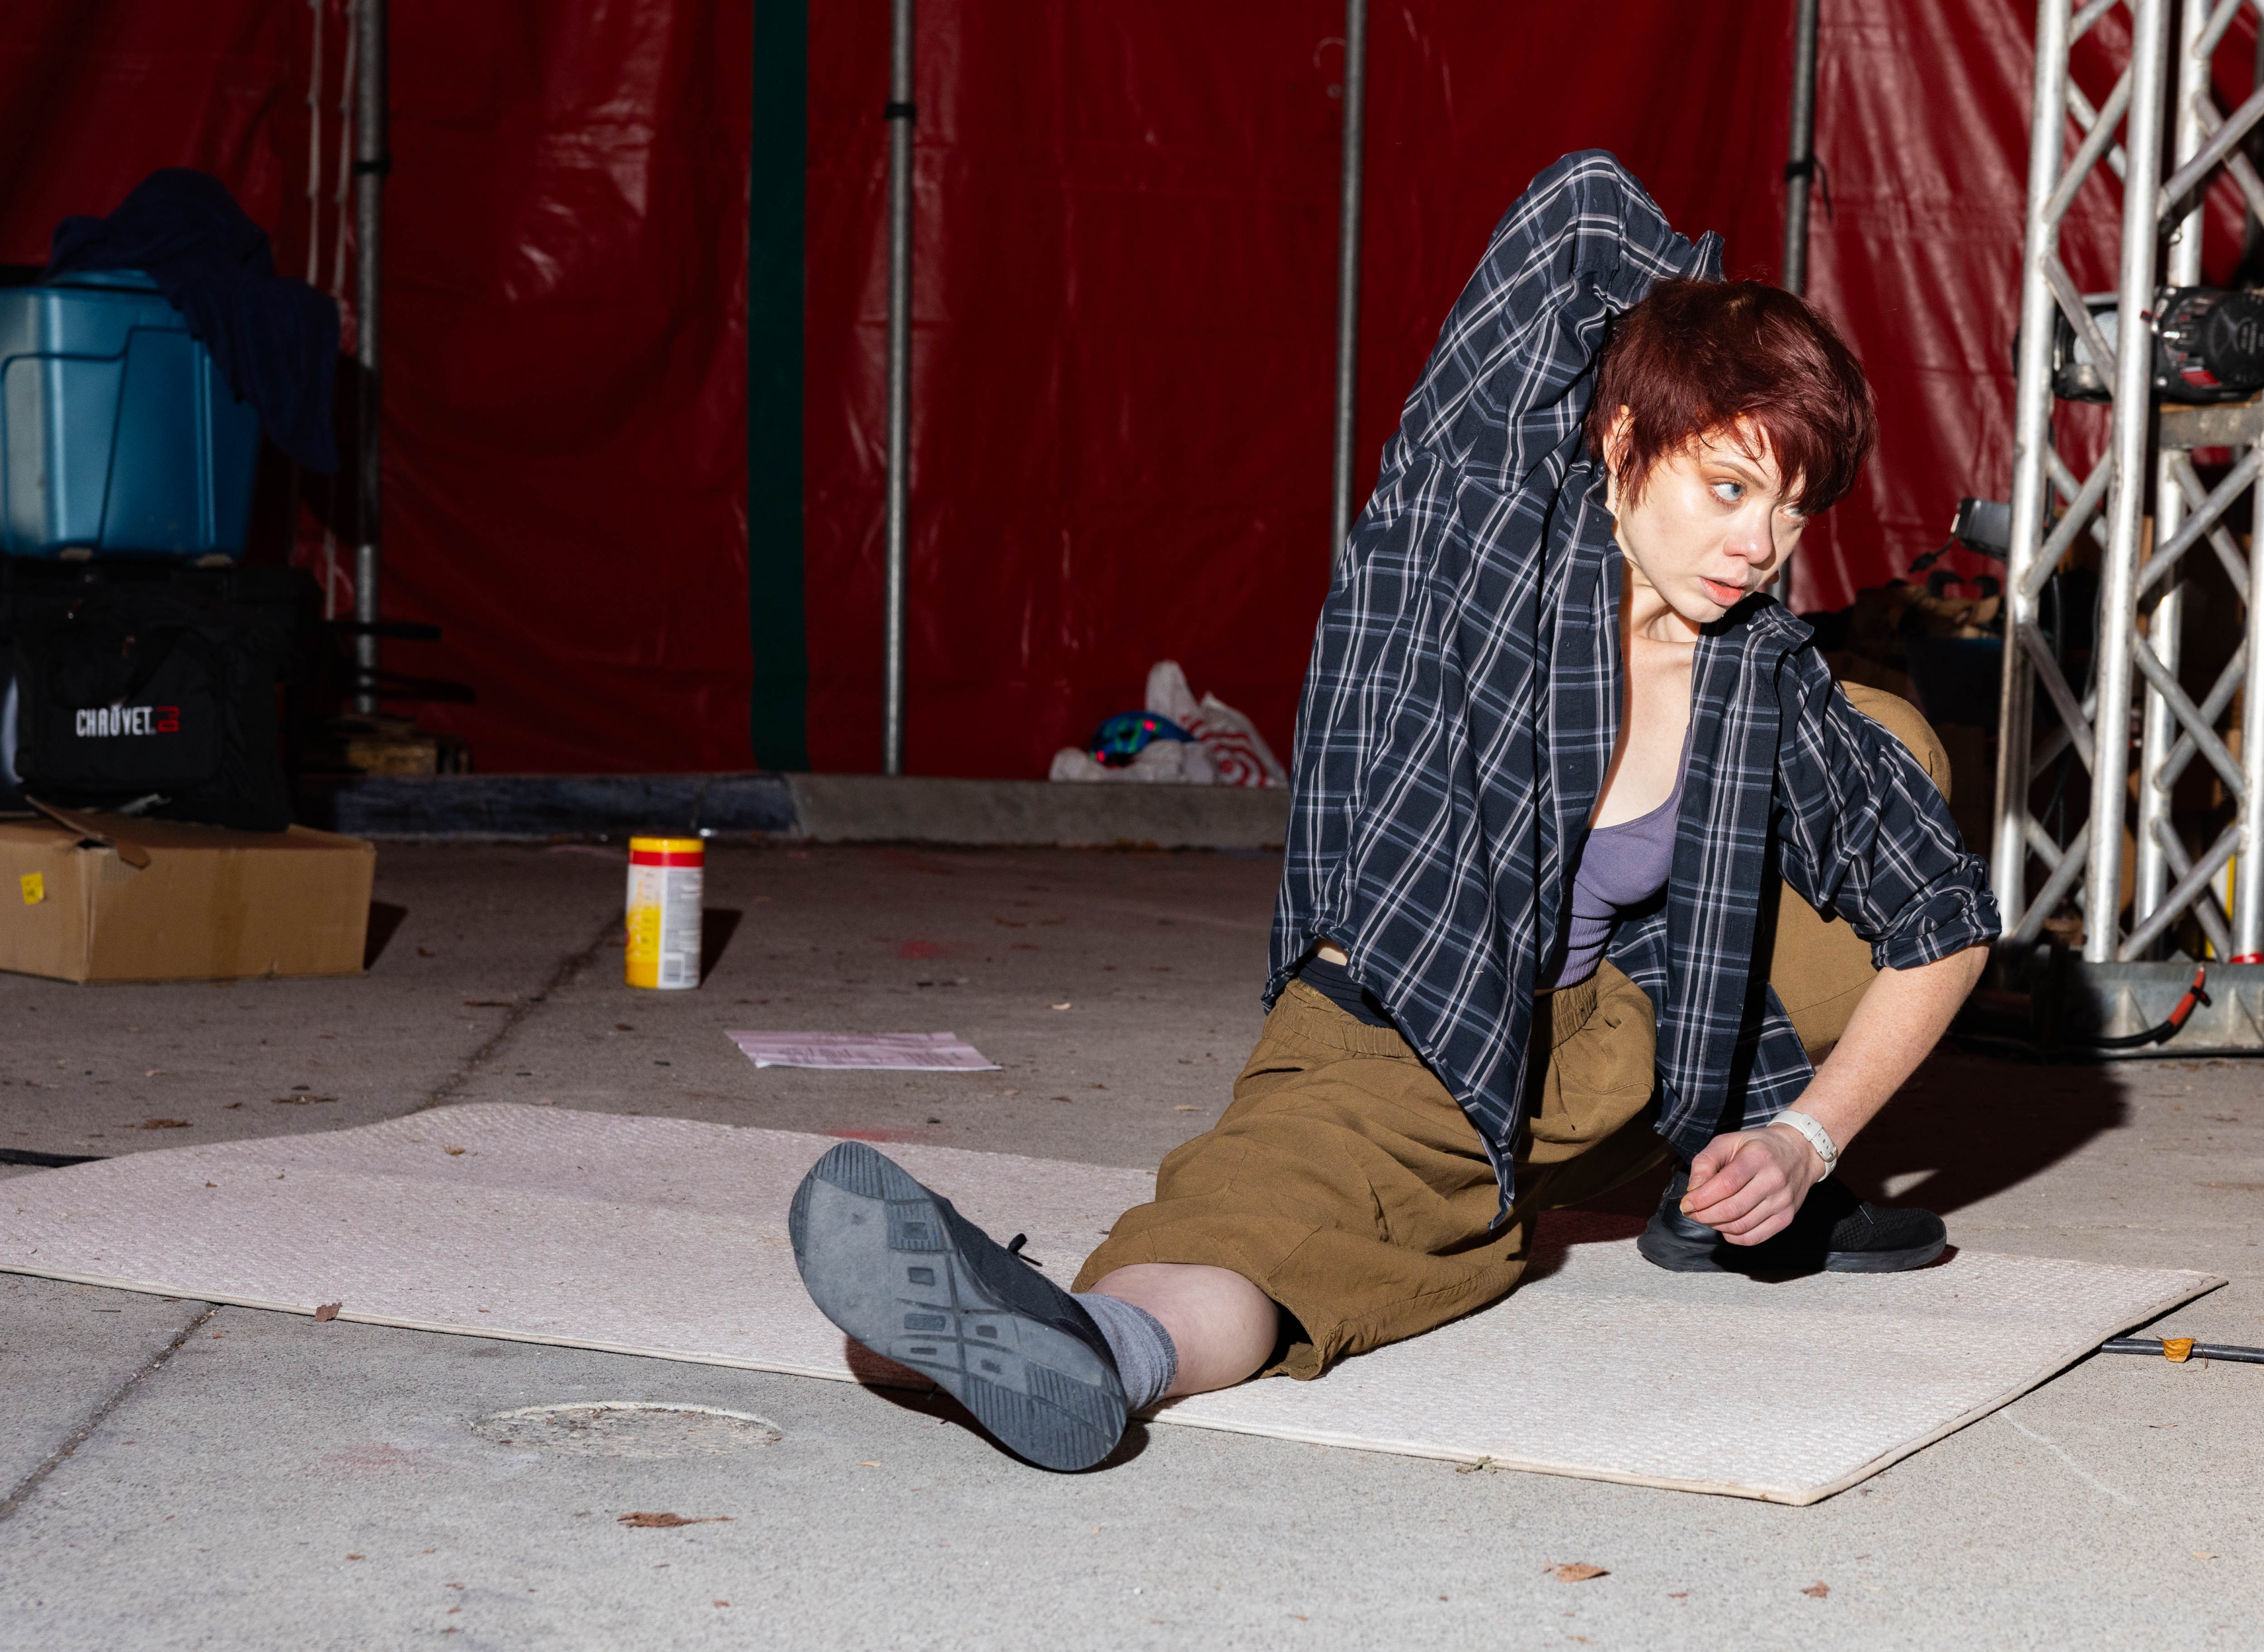 A person with a blue flannel shirt stretches on the ground.